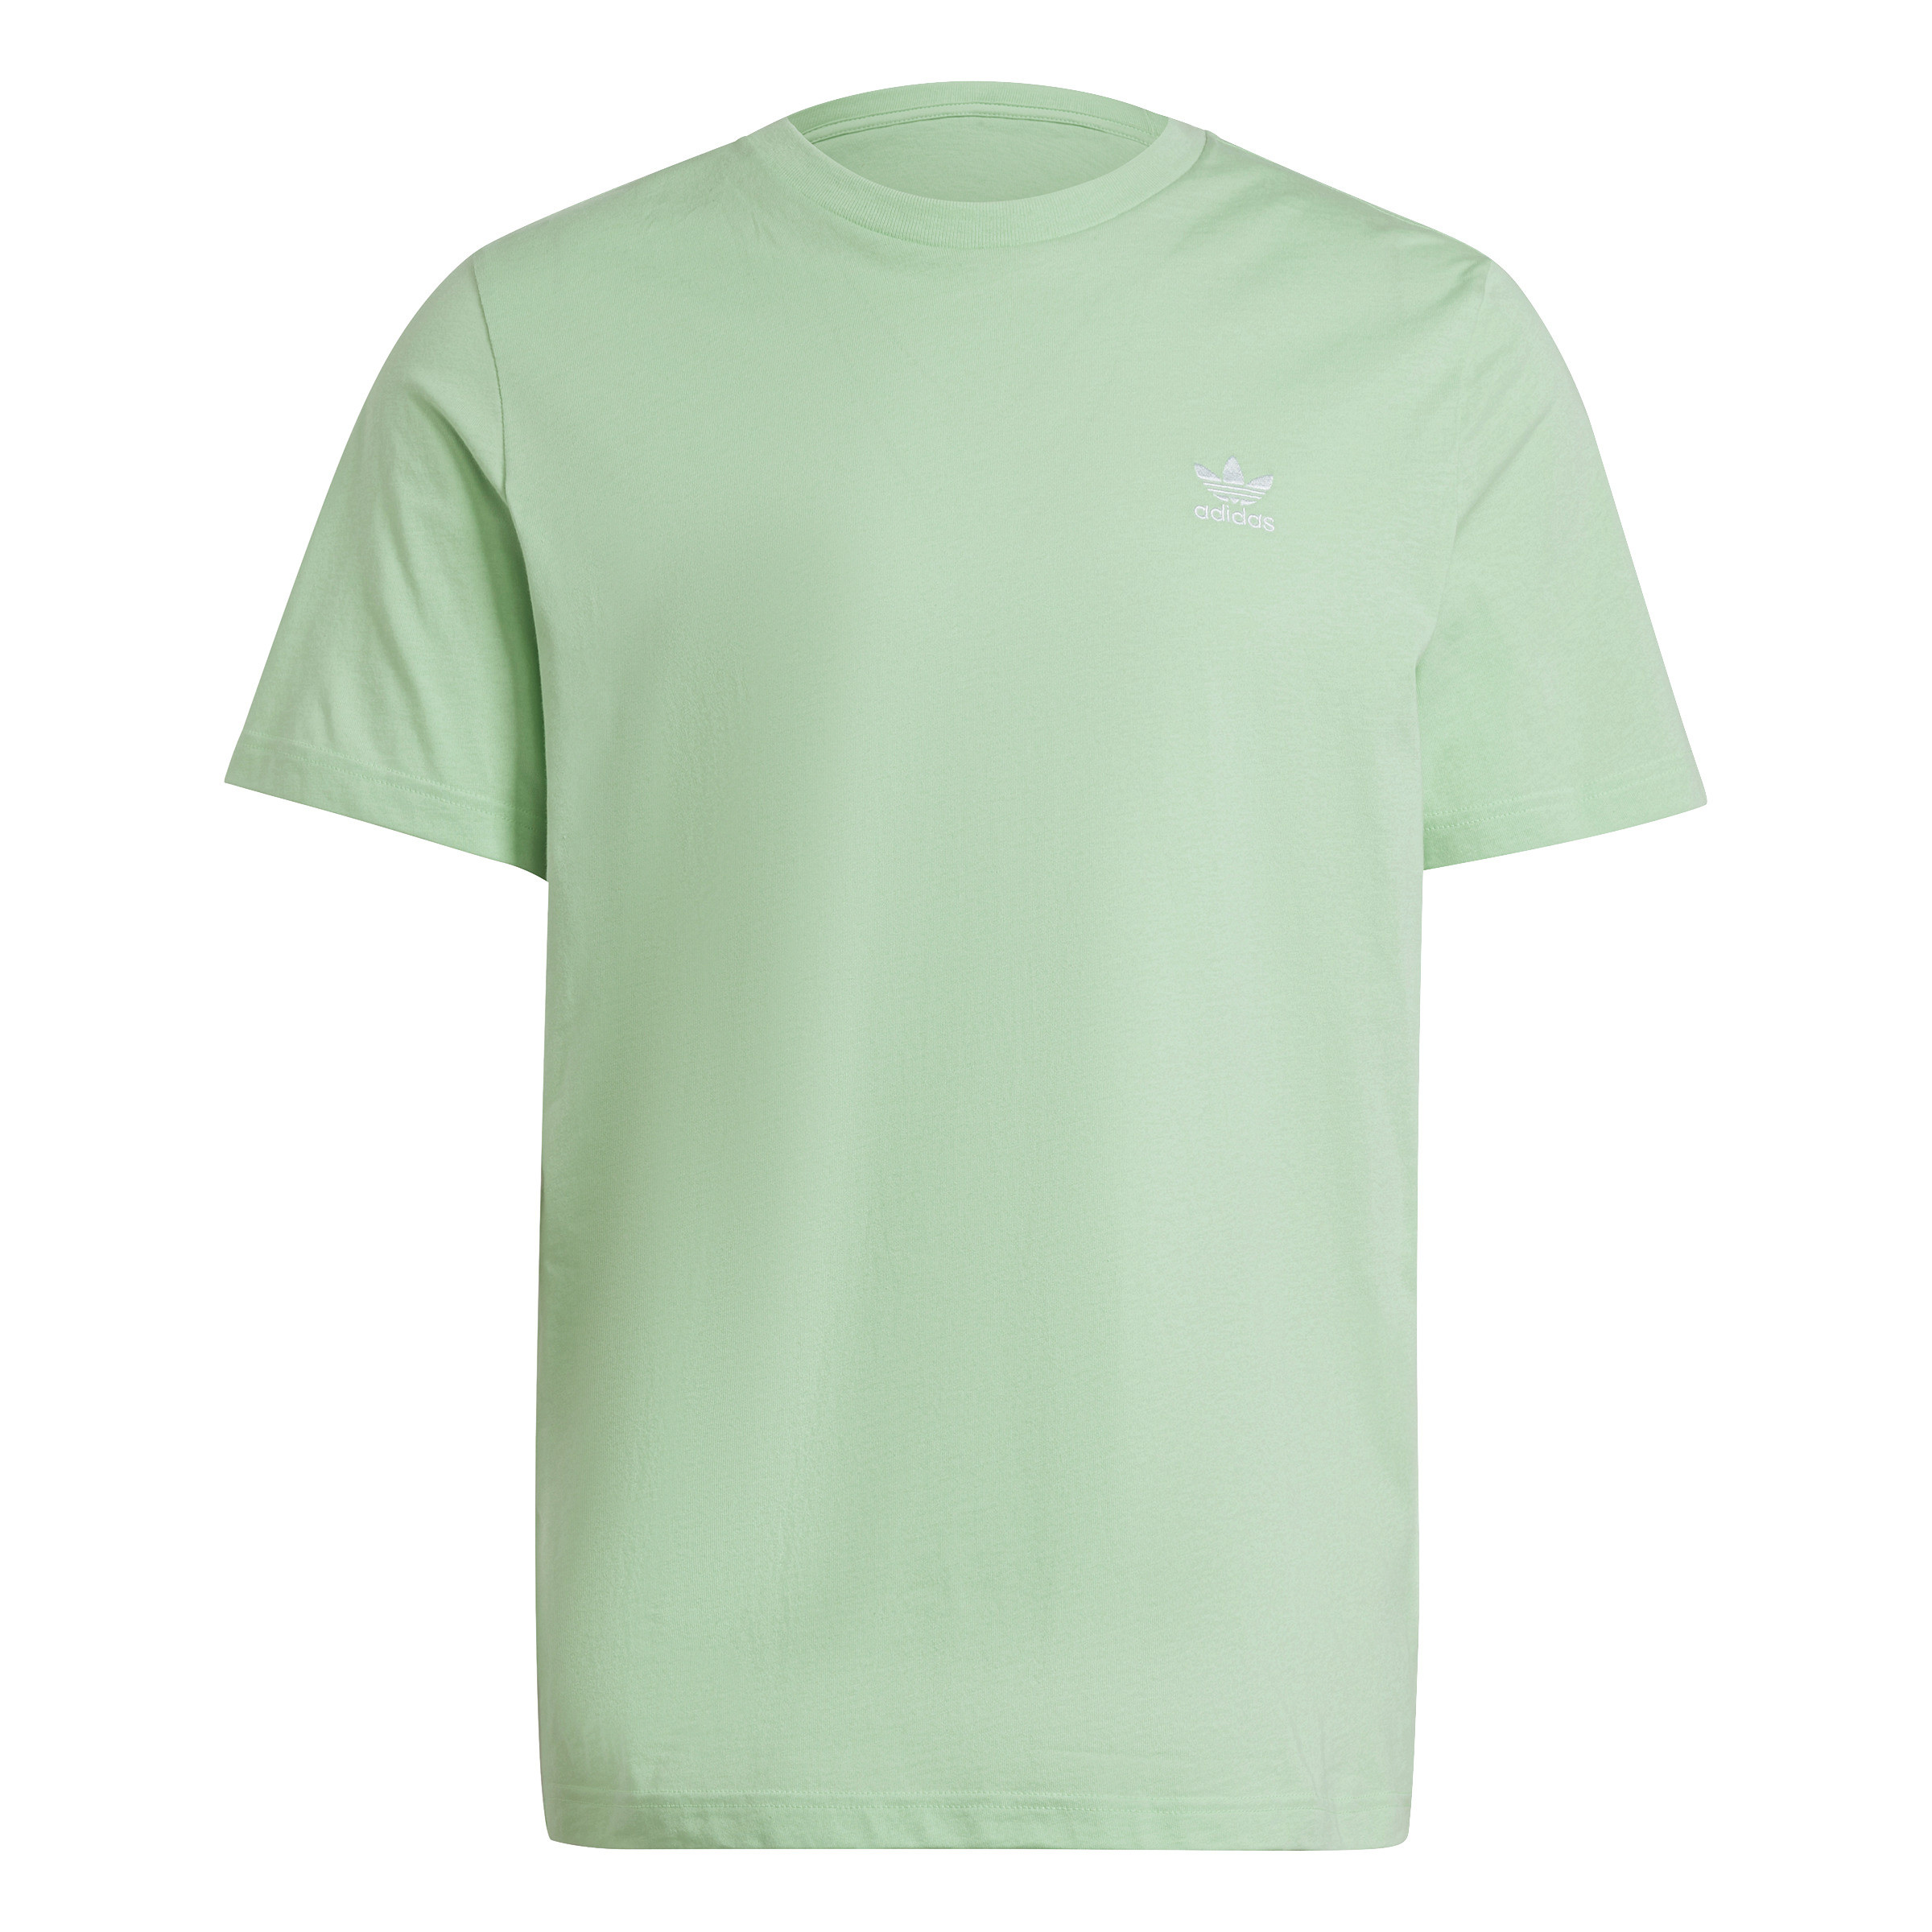 Adidas - Adicolor T-shirt with logo, Light Green, large image number 0